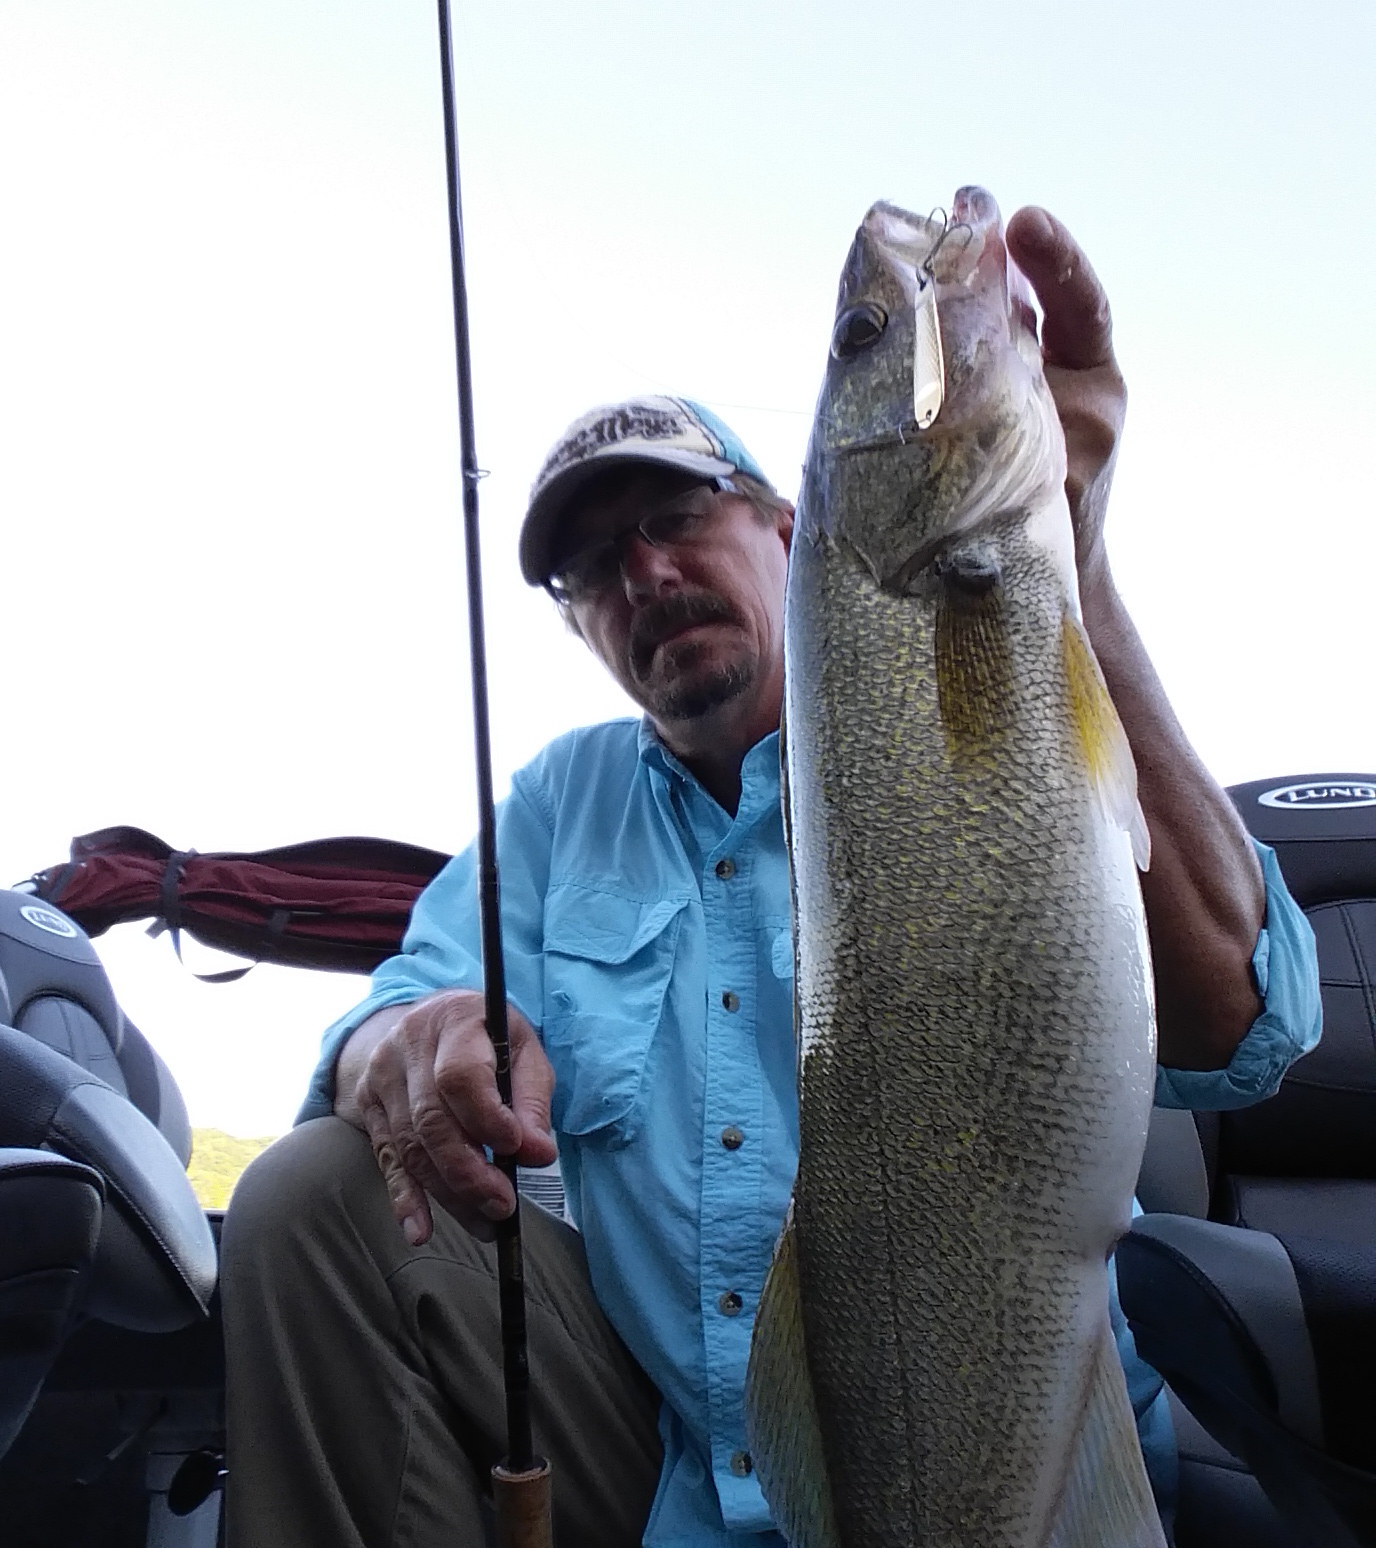 Brookville Lake Guide Service - Meet Your Guide